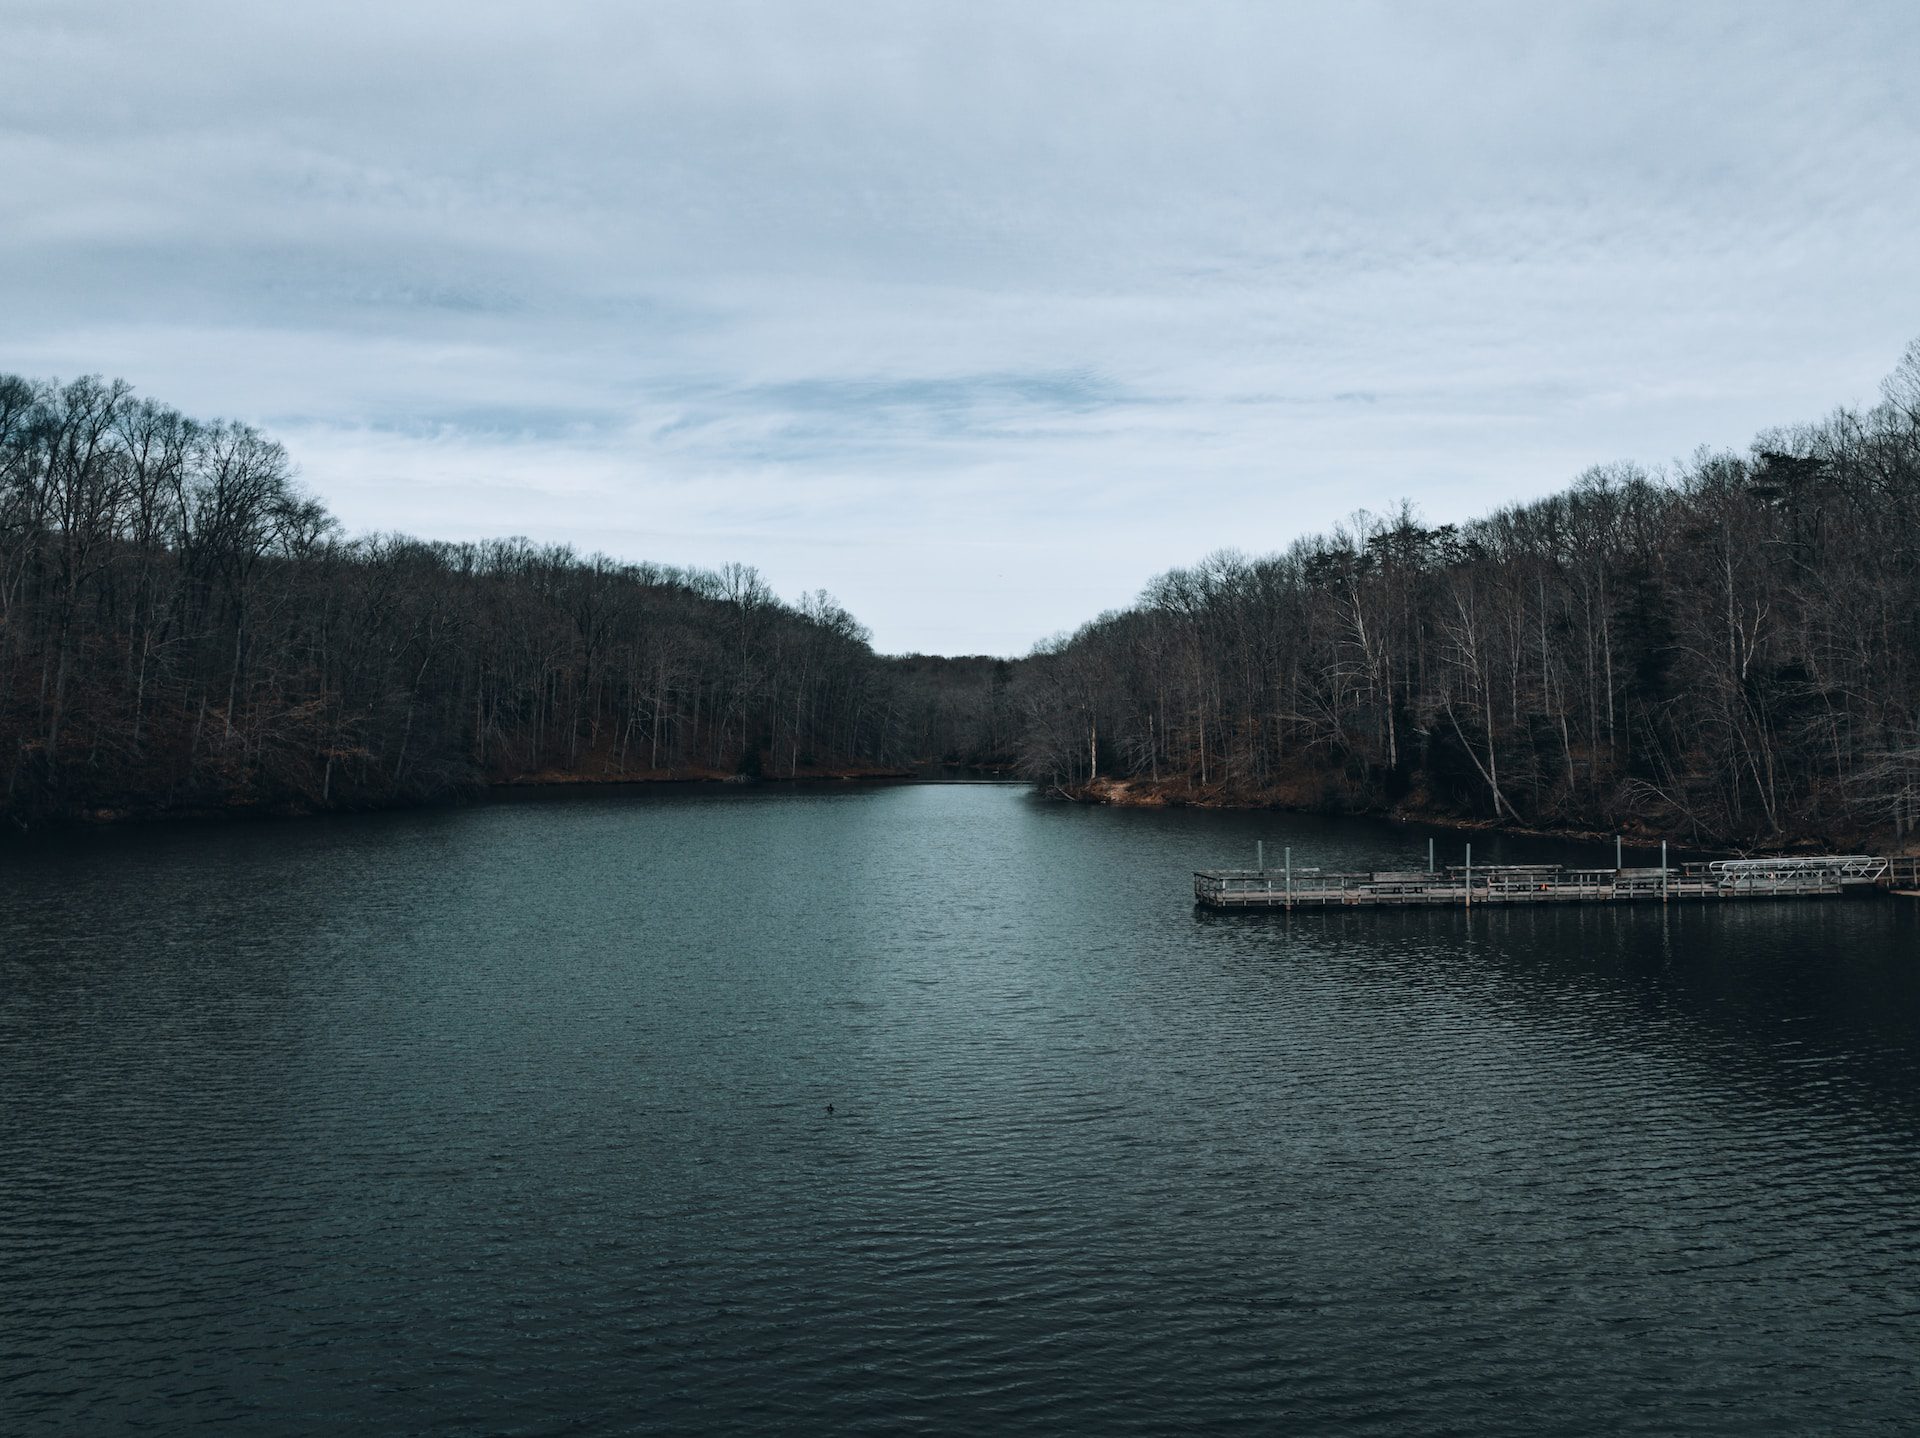 A large body of water surrounded by trees near Hampton, Virginia.